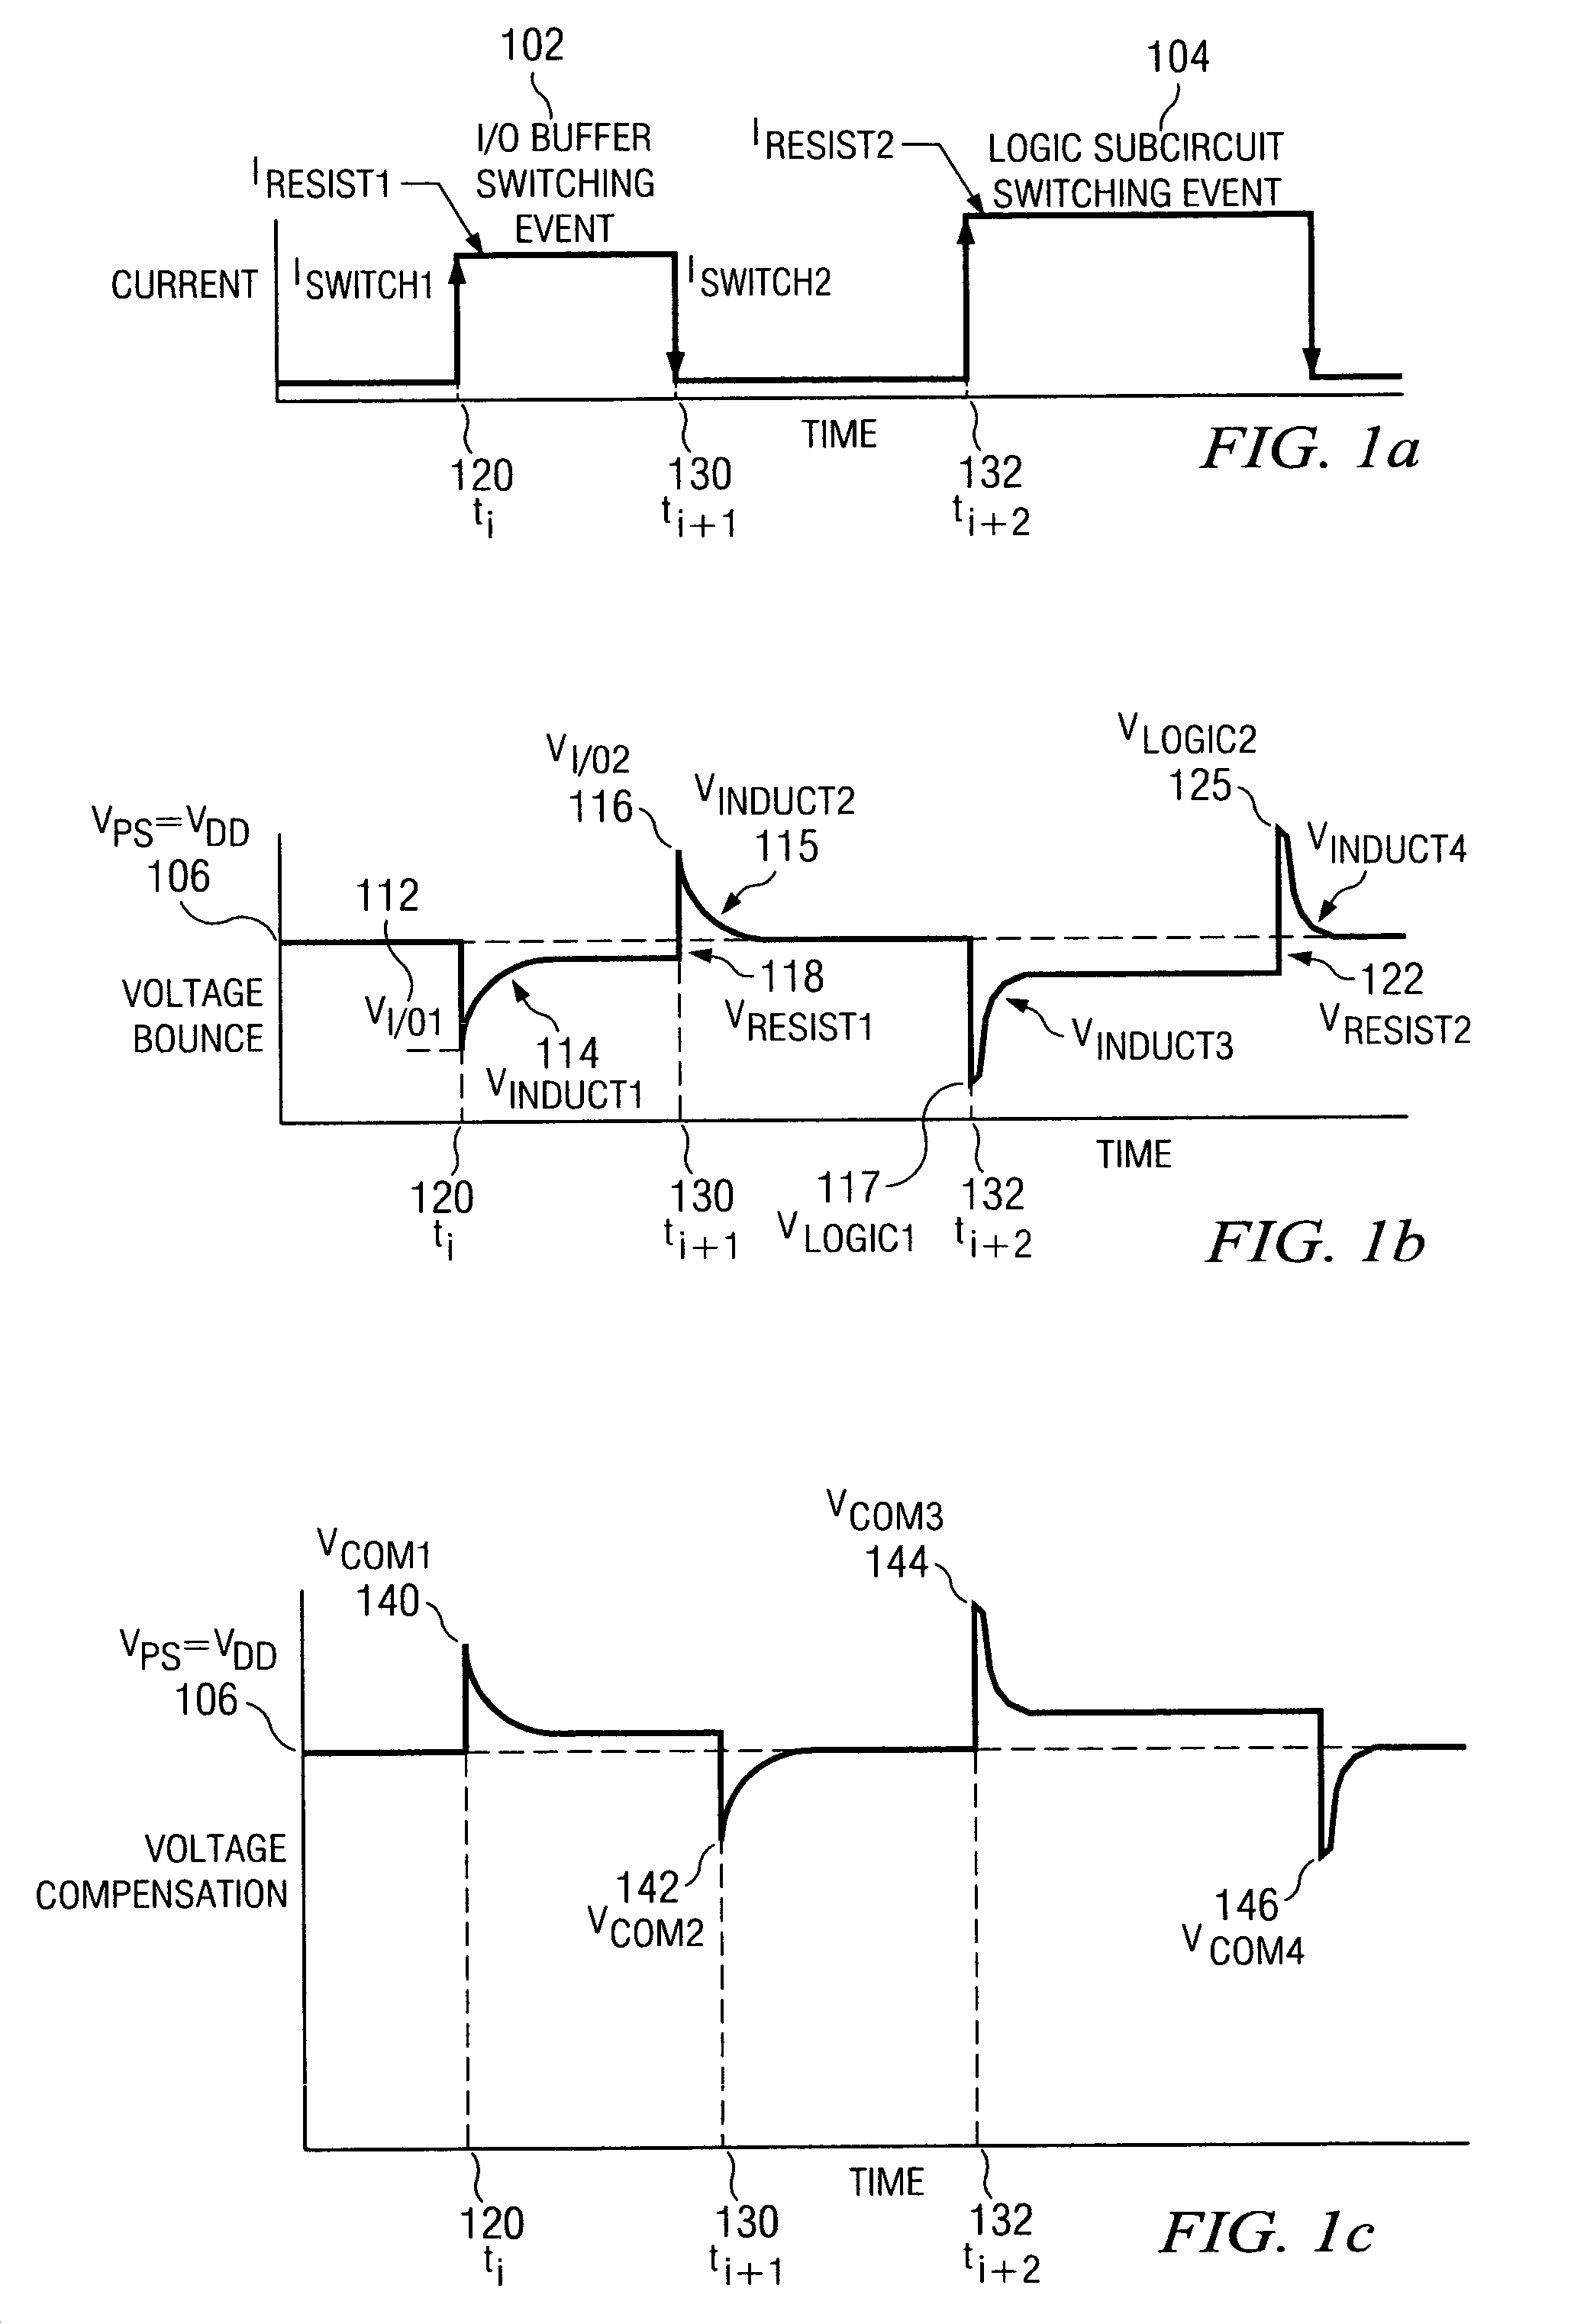 Method and apparatus to minimize power and ground bounce in a logic device